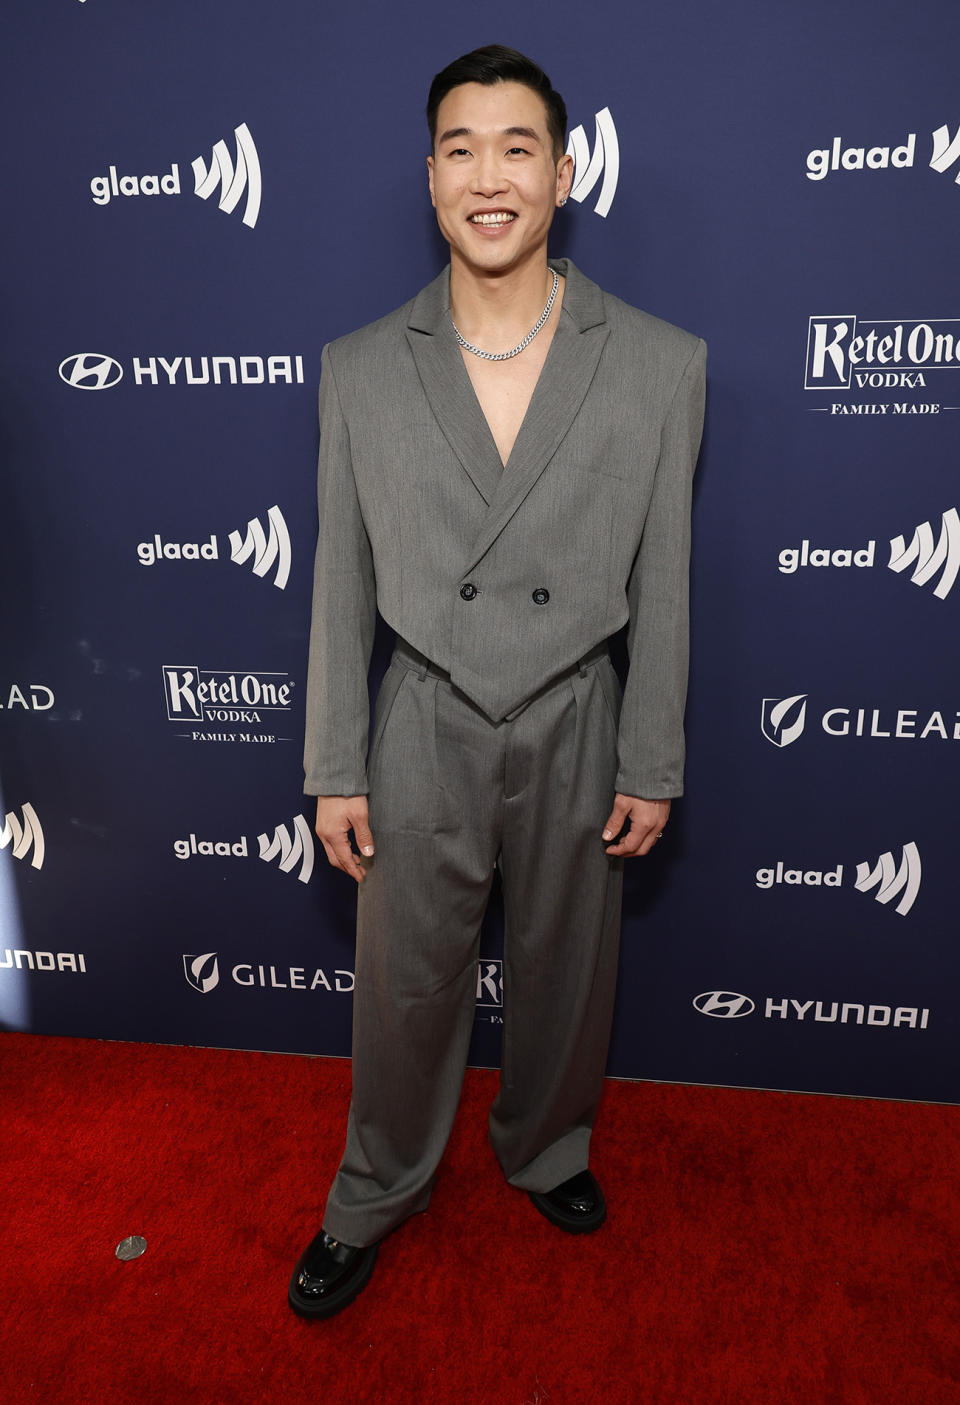 <p>BEVERLY HILLS, CALIFORNIA – MARCH 30: Joel Kim Booster attends the GLAAD Media Awards at The Beverly Hilton on March 30, 2023 in Beverly Hills, California. (Photo by Frazer Harrison/Getty Images for GLAAD)</p>